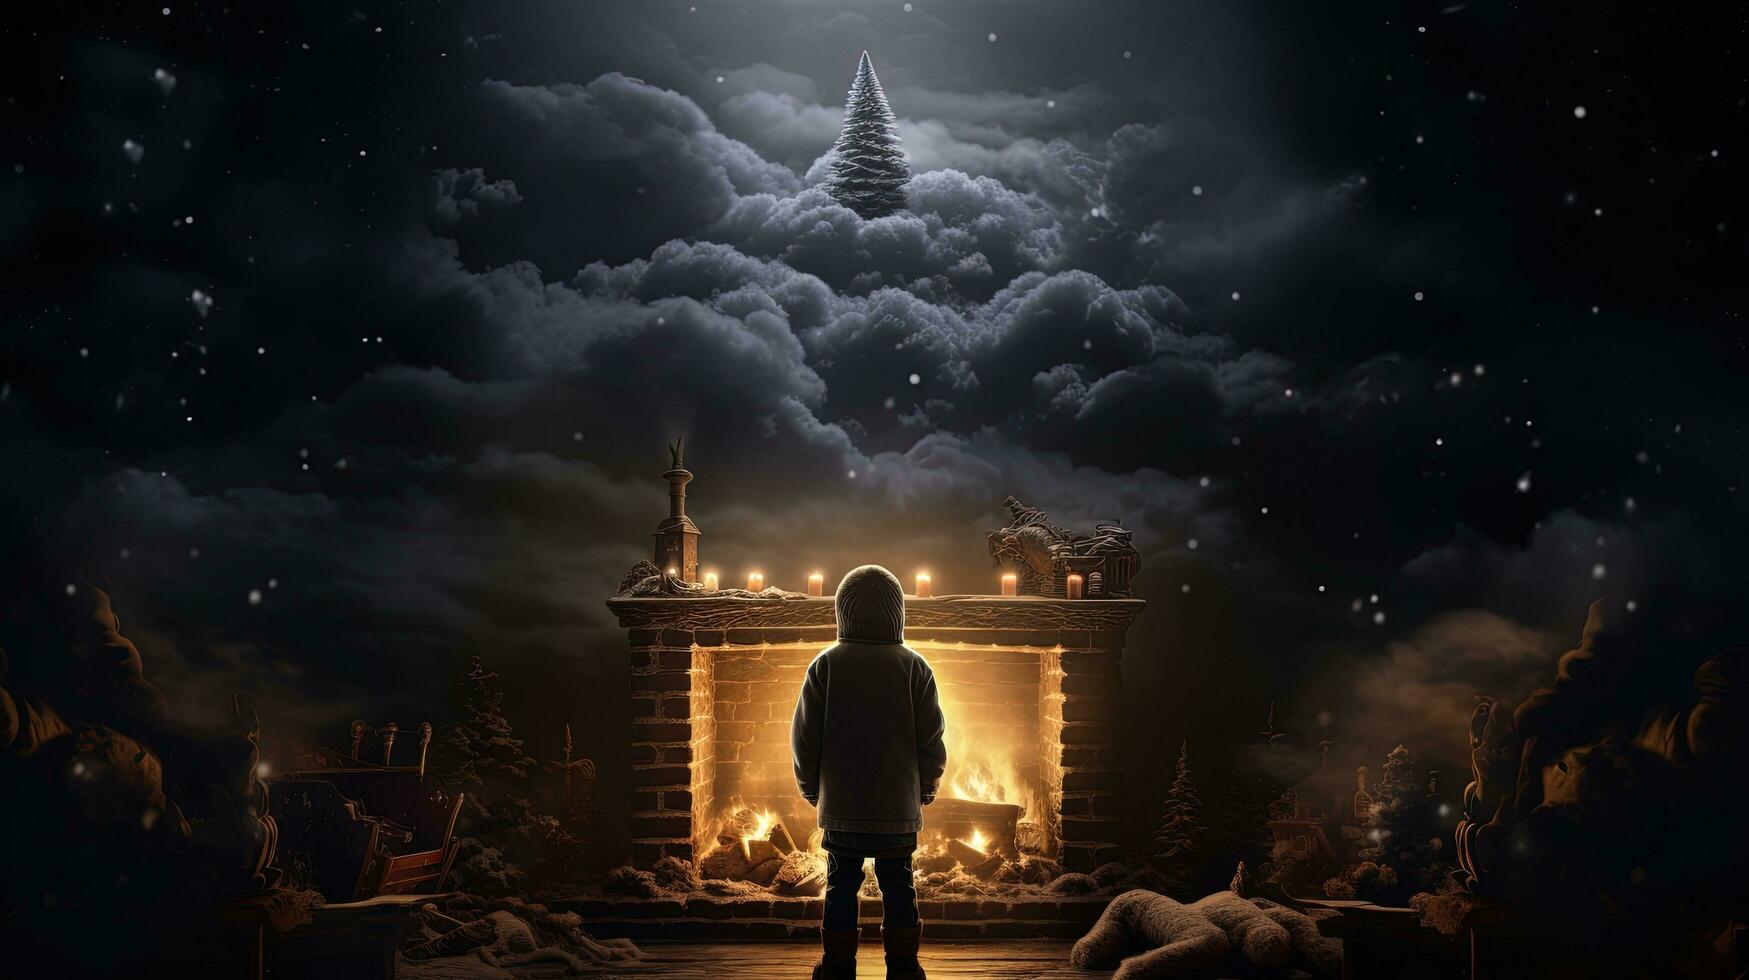 Surprised child finds Santa by the fireplace on a moonlit Christmas night. silhouette concept photo